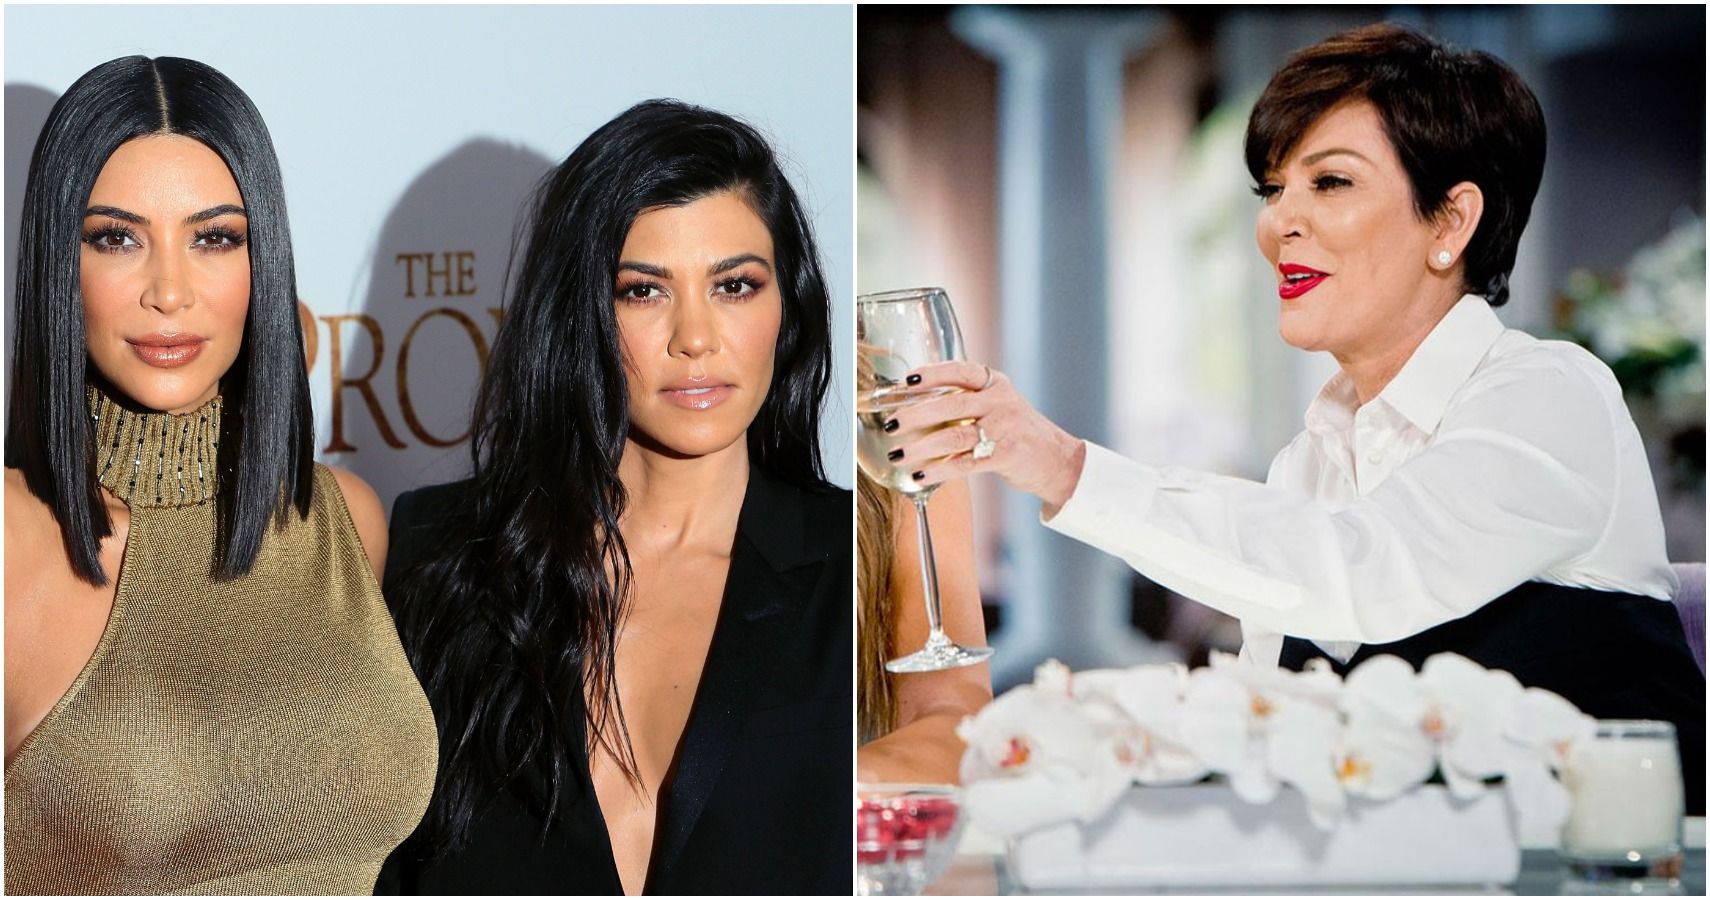 10 Behind The Scenes Facts About Keeping Up With The Kardashians You